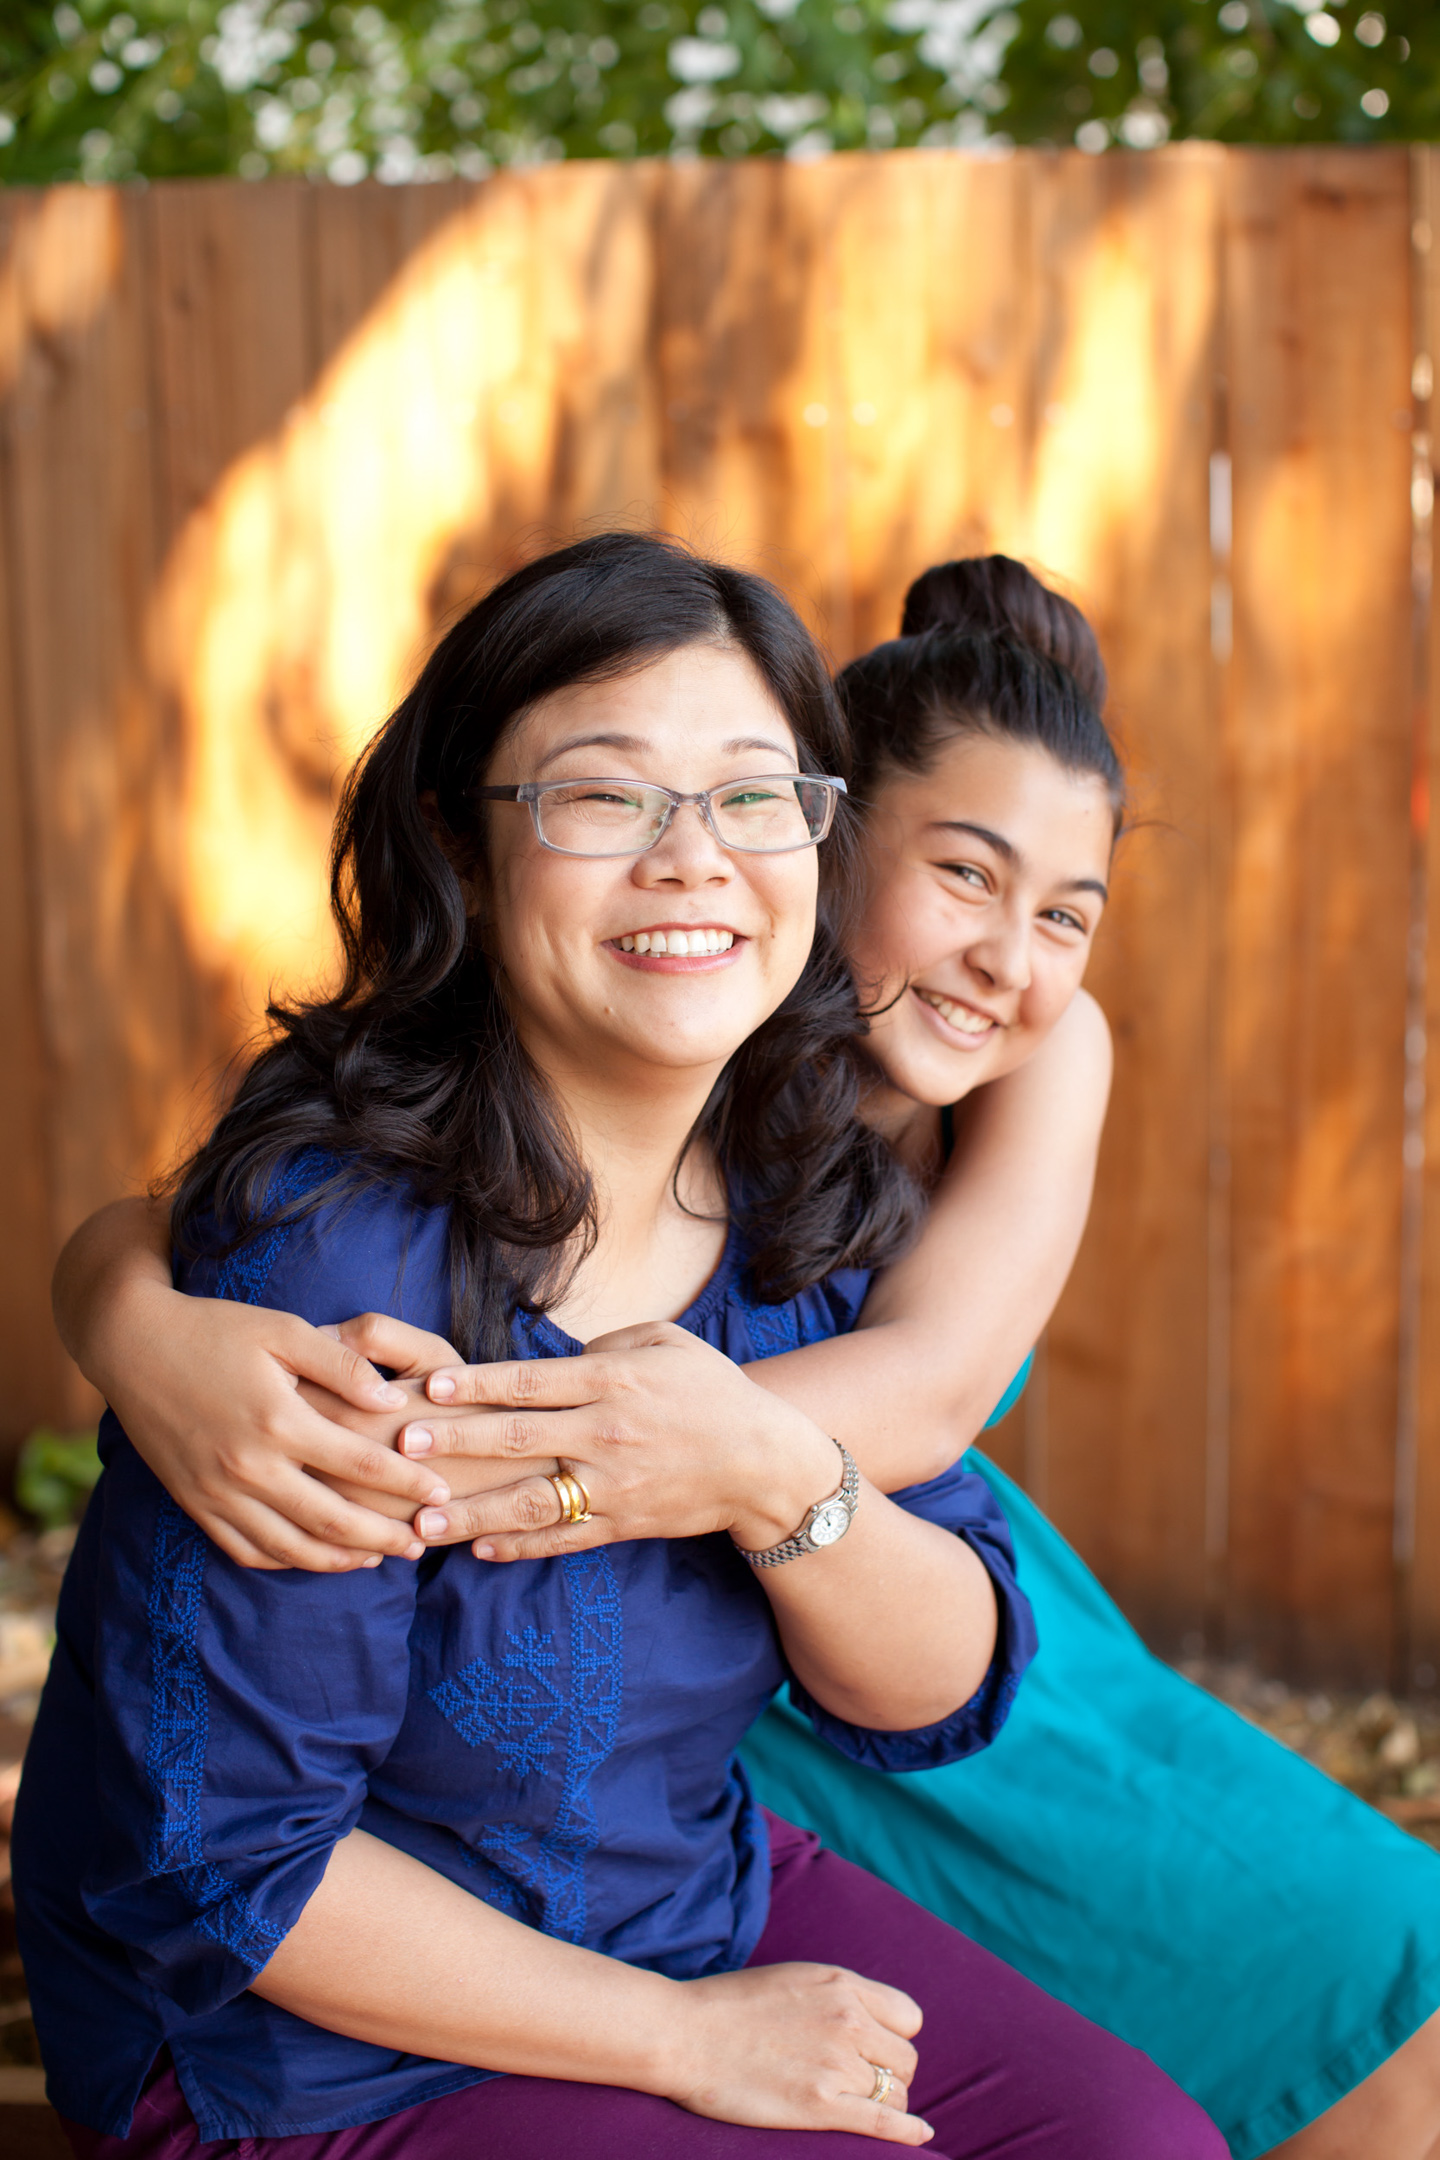 A teen girl hugs her mother while posing for a portrait in a garden